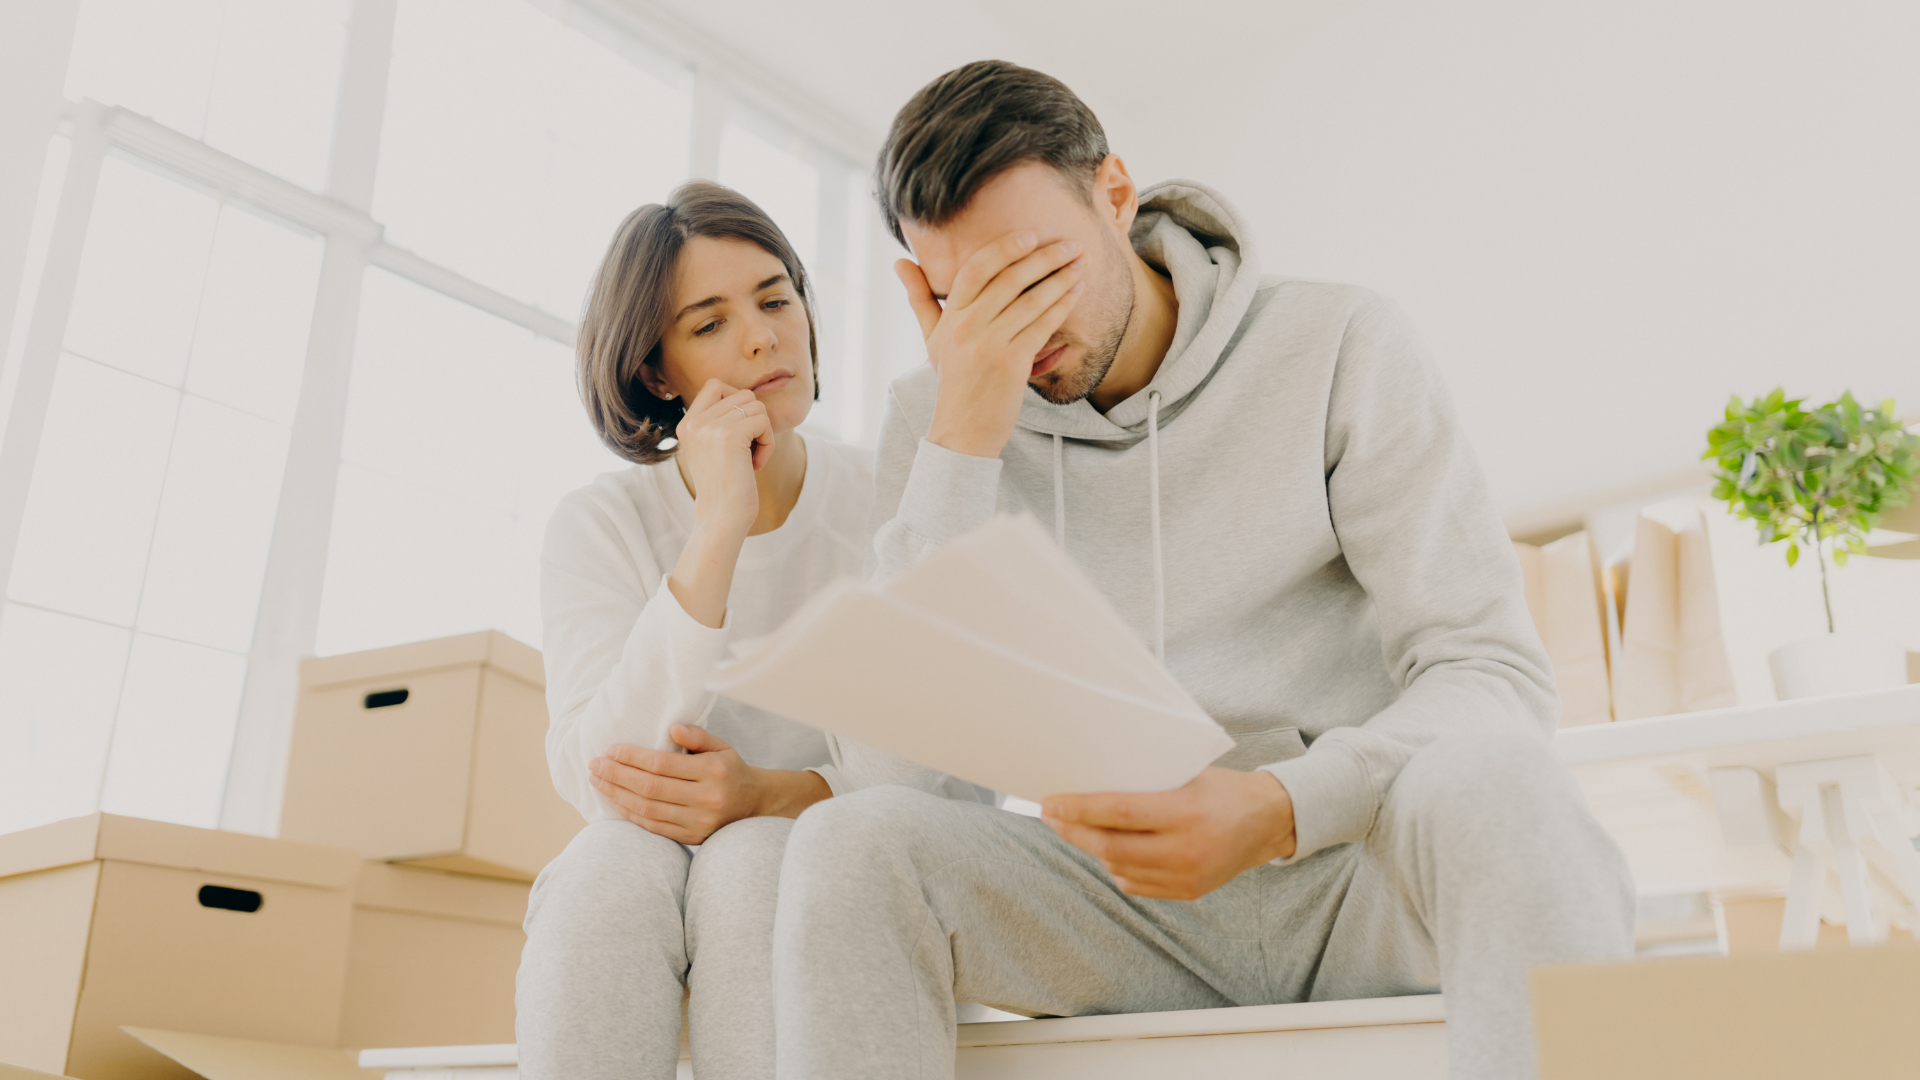 Individual or couple reviewing documents with a contemplative expression, symbolising reconsideration after a mortgage application decline.